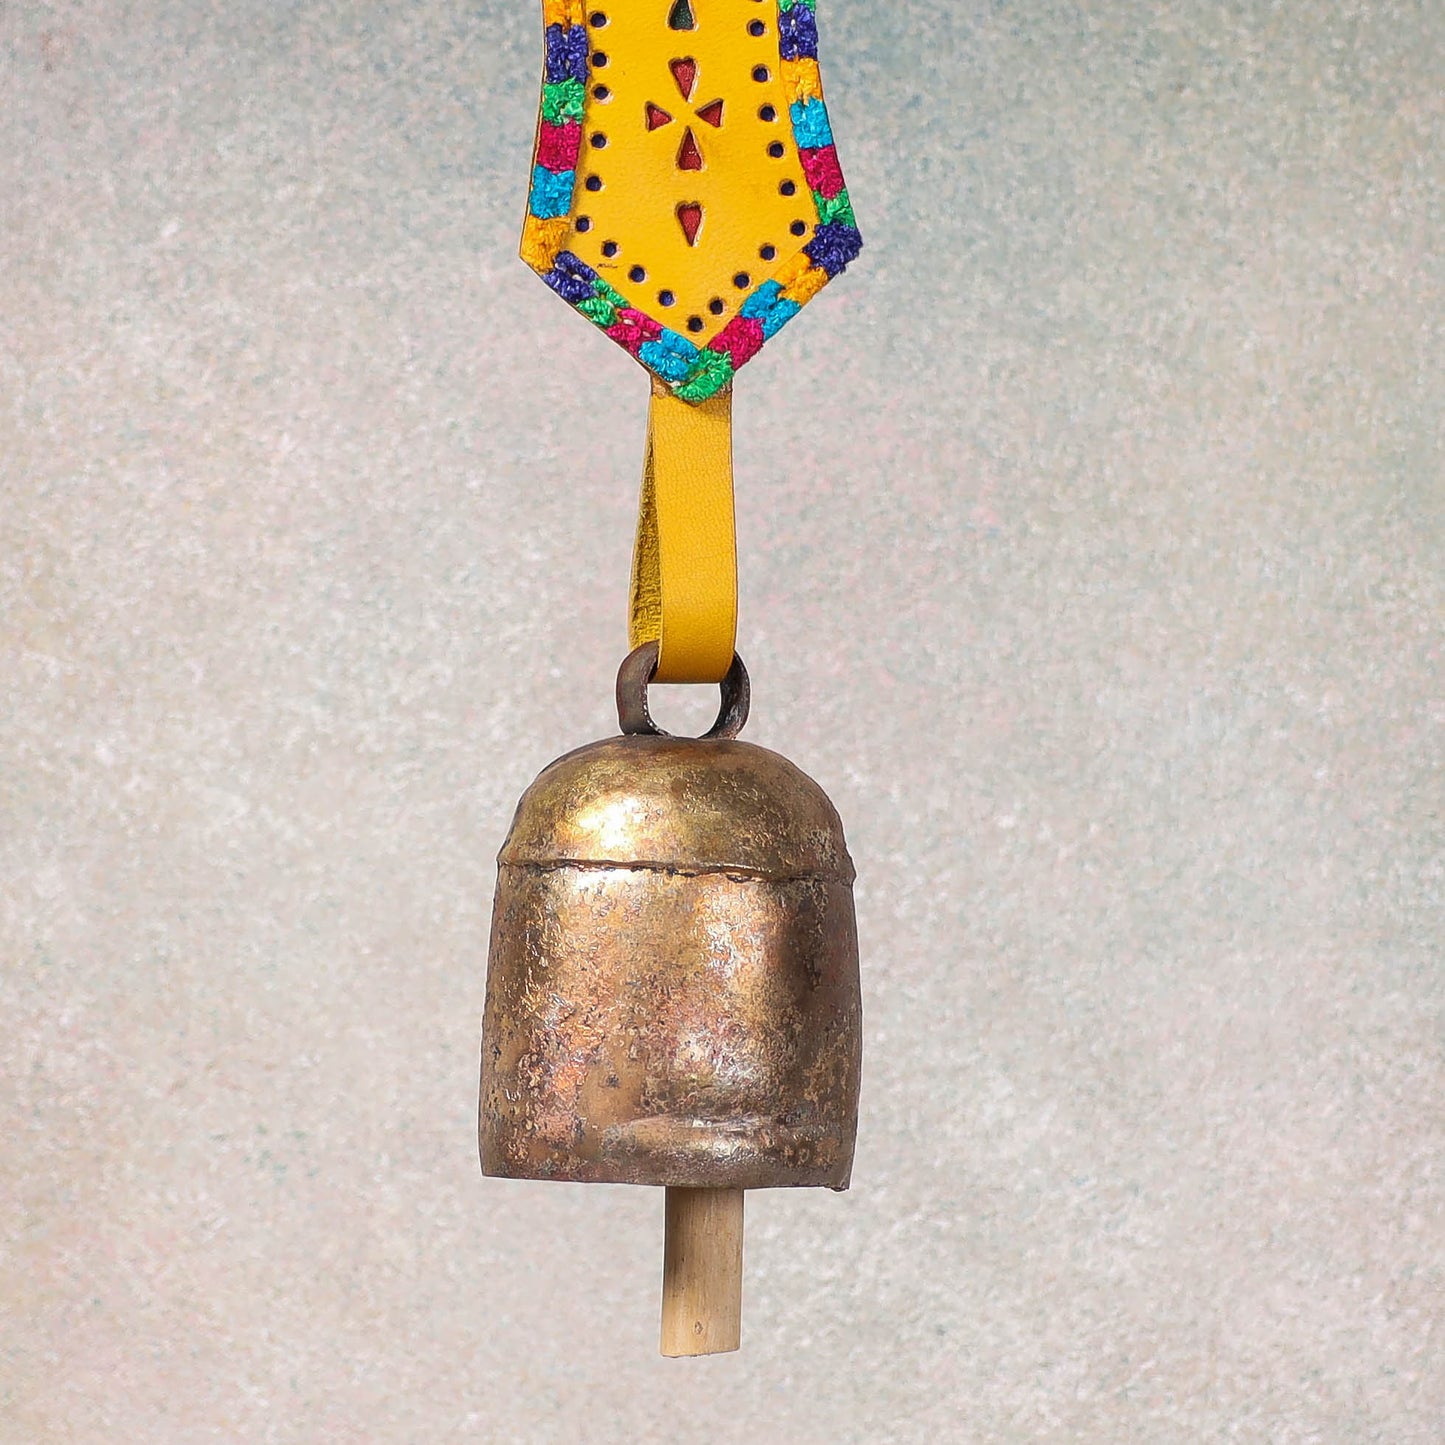 Kutch Copper Coated Bell with Leather Belt